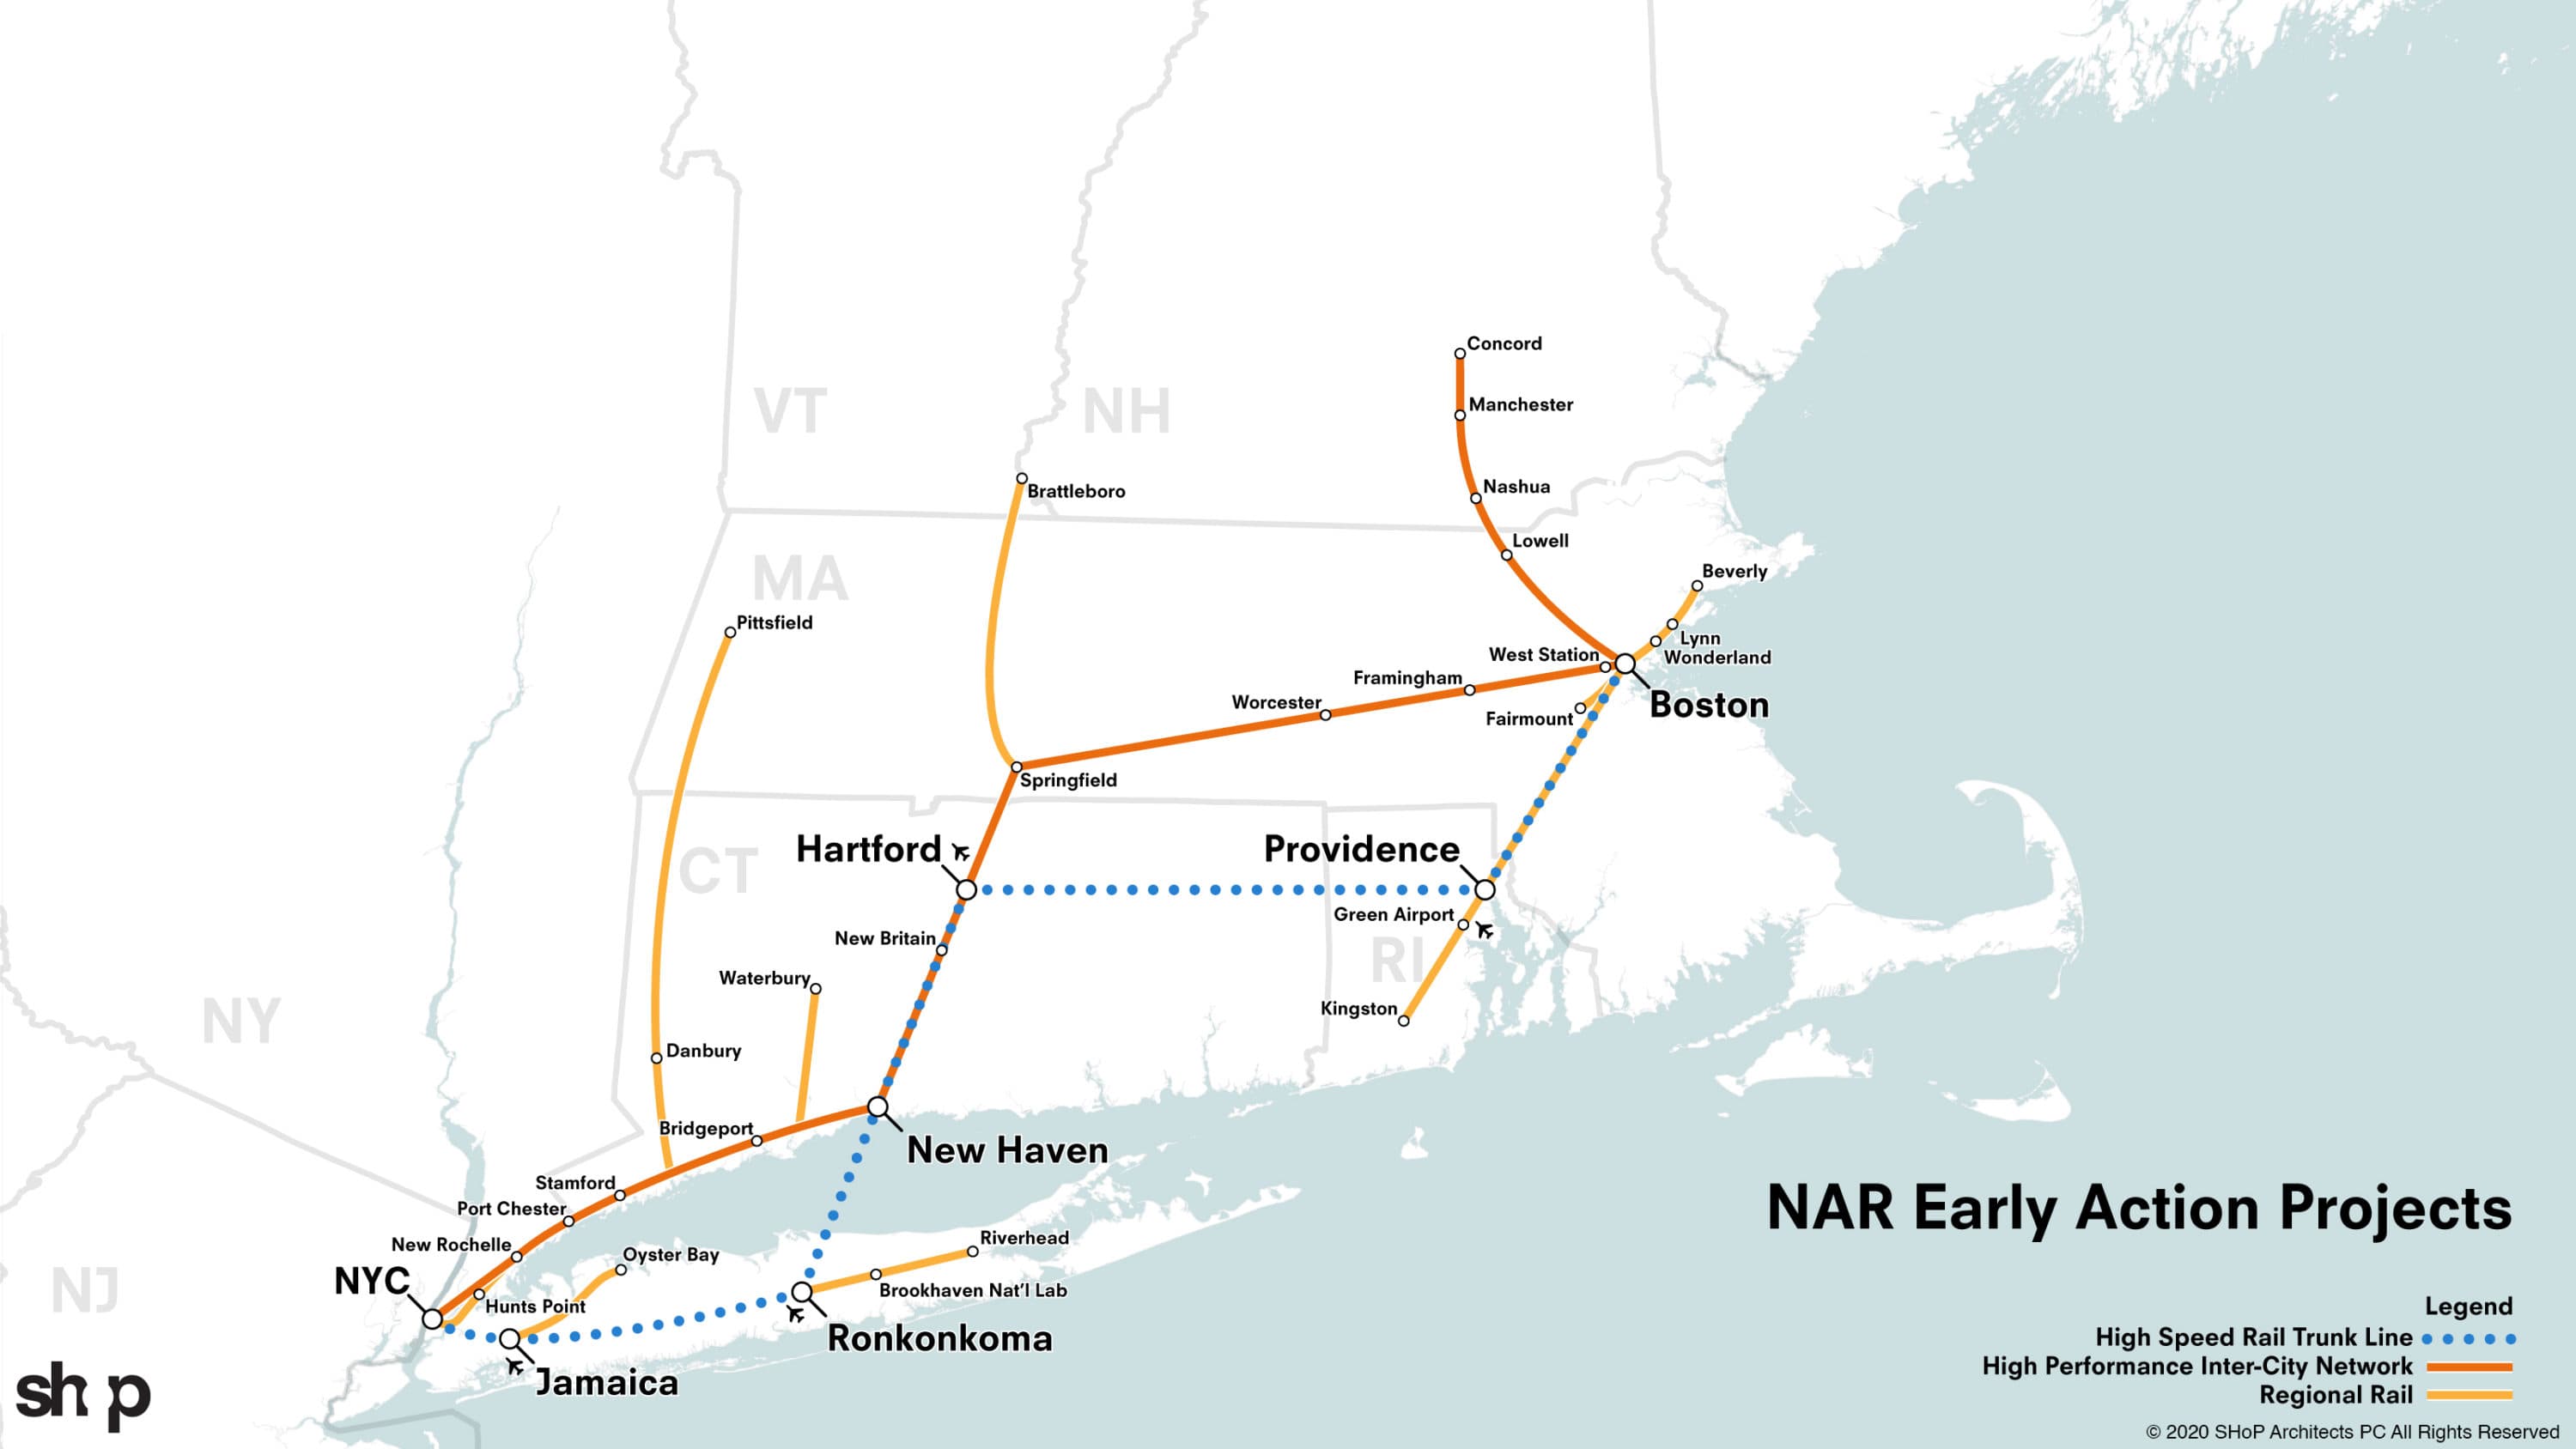 Proposed train routes under the North Atlantic Rail project (Courtesy NAR)